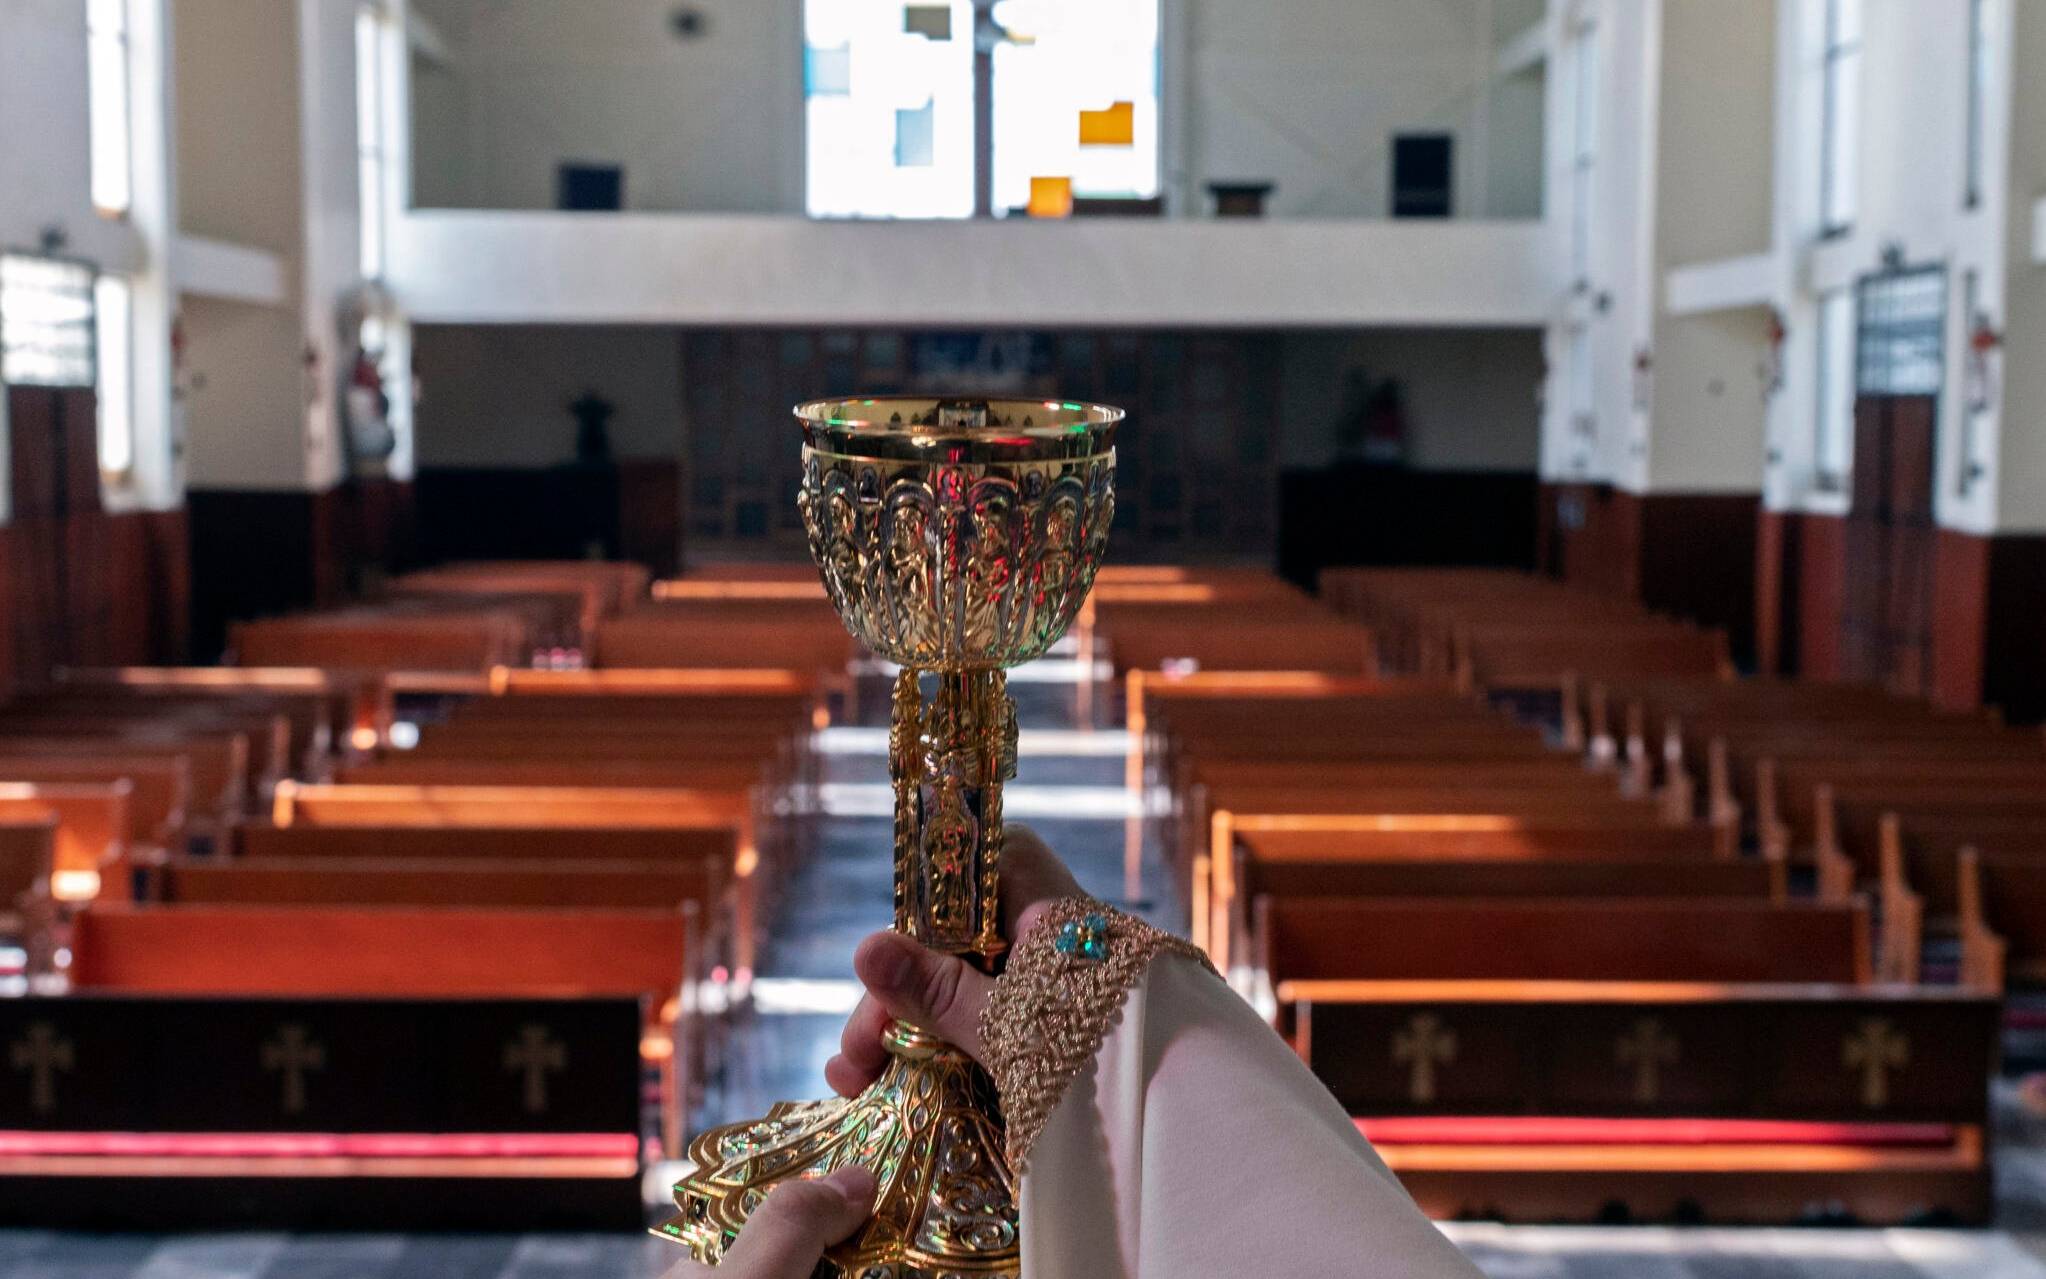 Catholic priest Arturo Correa celebrates Easter Mass amid the Coronavirus pandemic in the near-empty parish of Our Lady of Guadalupe, in Tlalnepantla, Mexico State, on April 12, 2020.